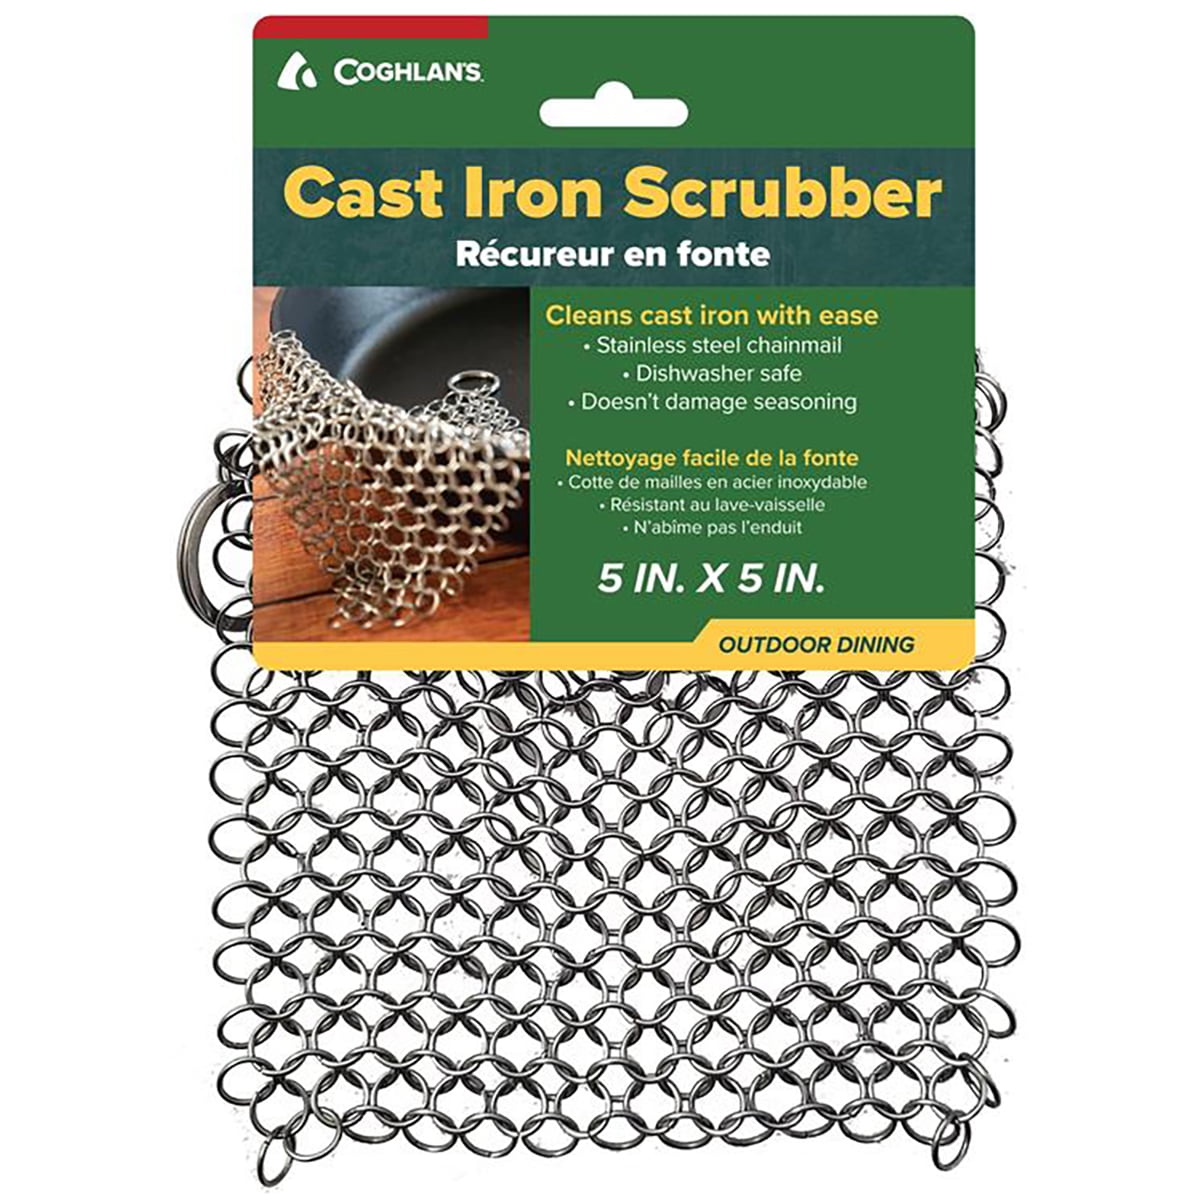 Cast Iron Cleaning Kit – Coghlan's